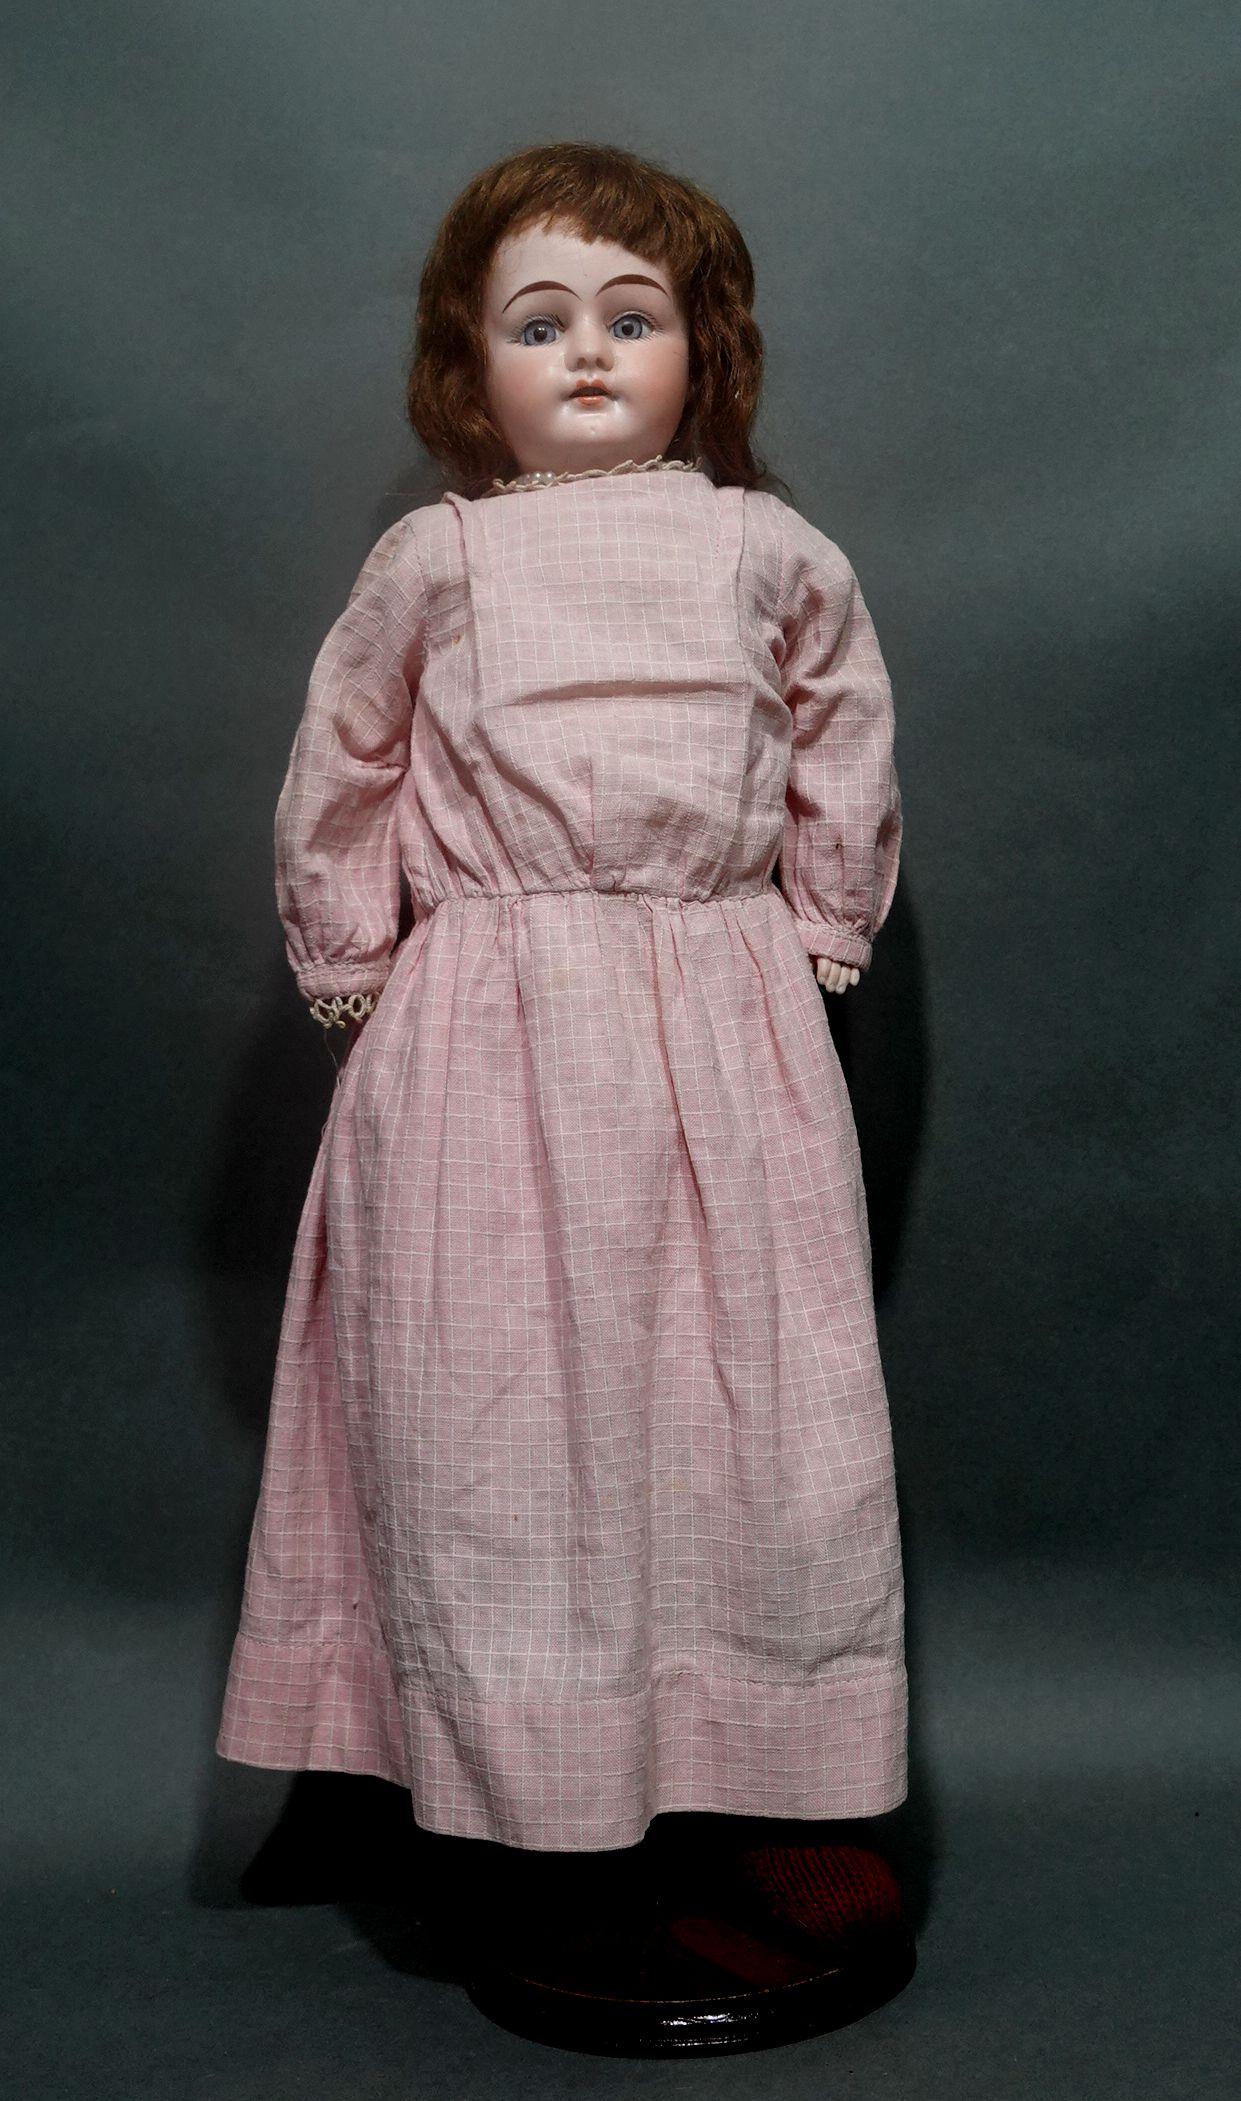 An original Armand Marseille doll, with a Bisque head and hands. Her feet wear red socks. Beautiful blue glass-fixed eyes and her parted lips show her perfect little teeth. Great overall condition. She is wearing a pink cotton dress, white